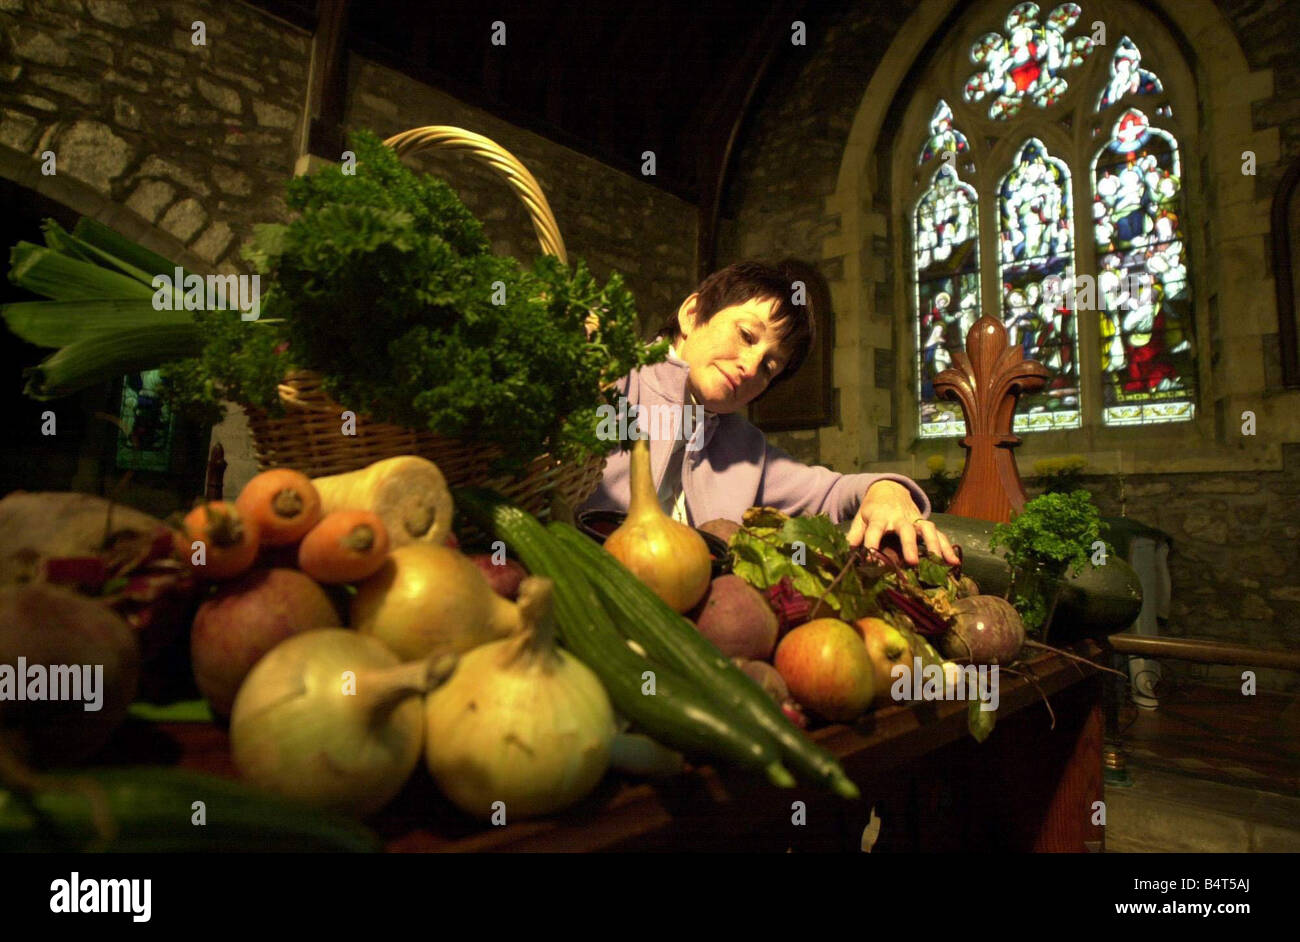 Kathy Williams from Llandewi Velfrey West Wales arranges the Harvest Festival display at the tiny church of St Davids in Llandewi Velfrey ready for the evenings service 3rd October 2003 Stock Photo